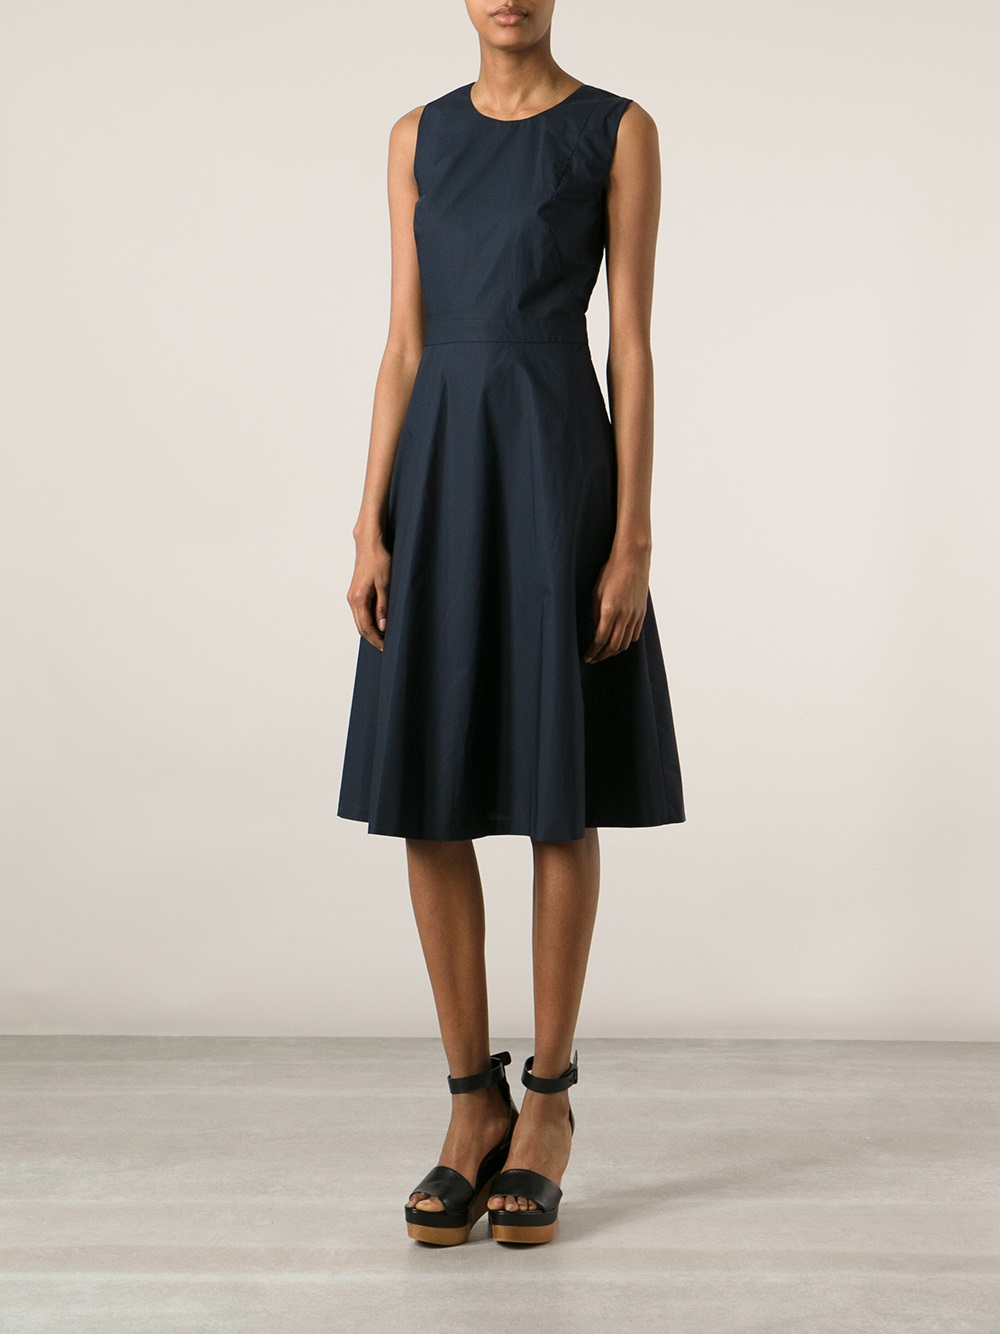 Lyst - Sofie D'Hoore Flared Shift Dress in Blue